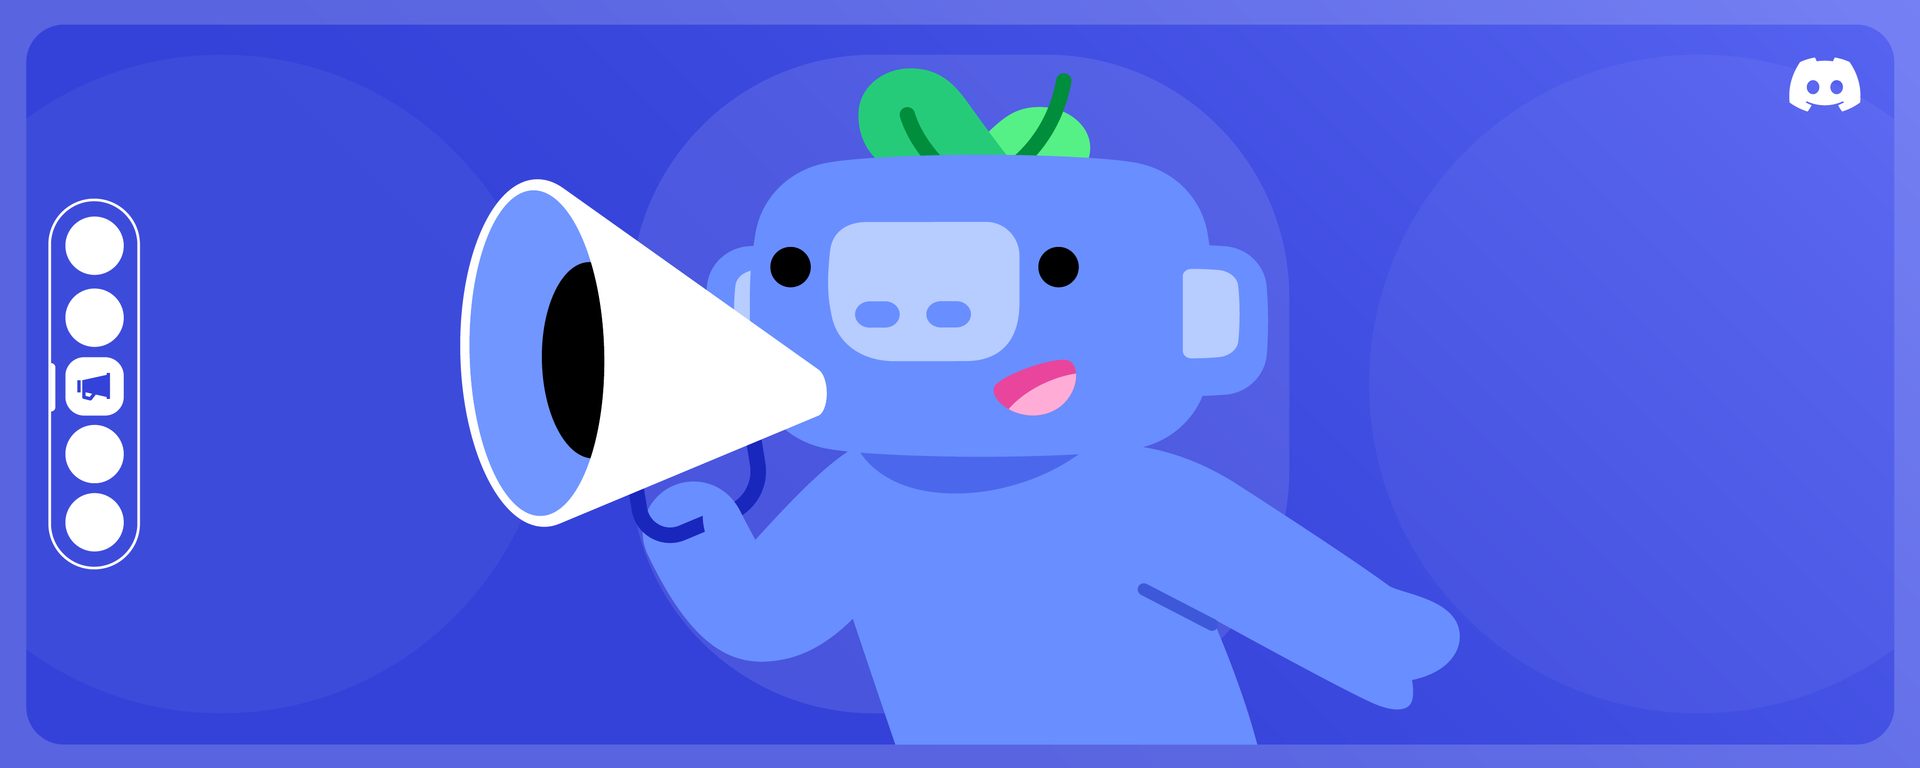 Discord Unblocked explained: How to unblock Discord?